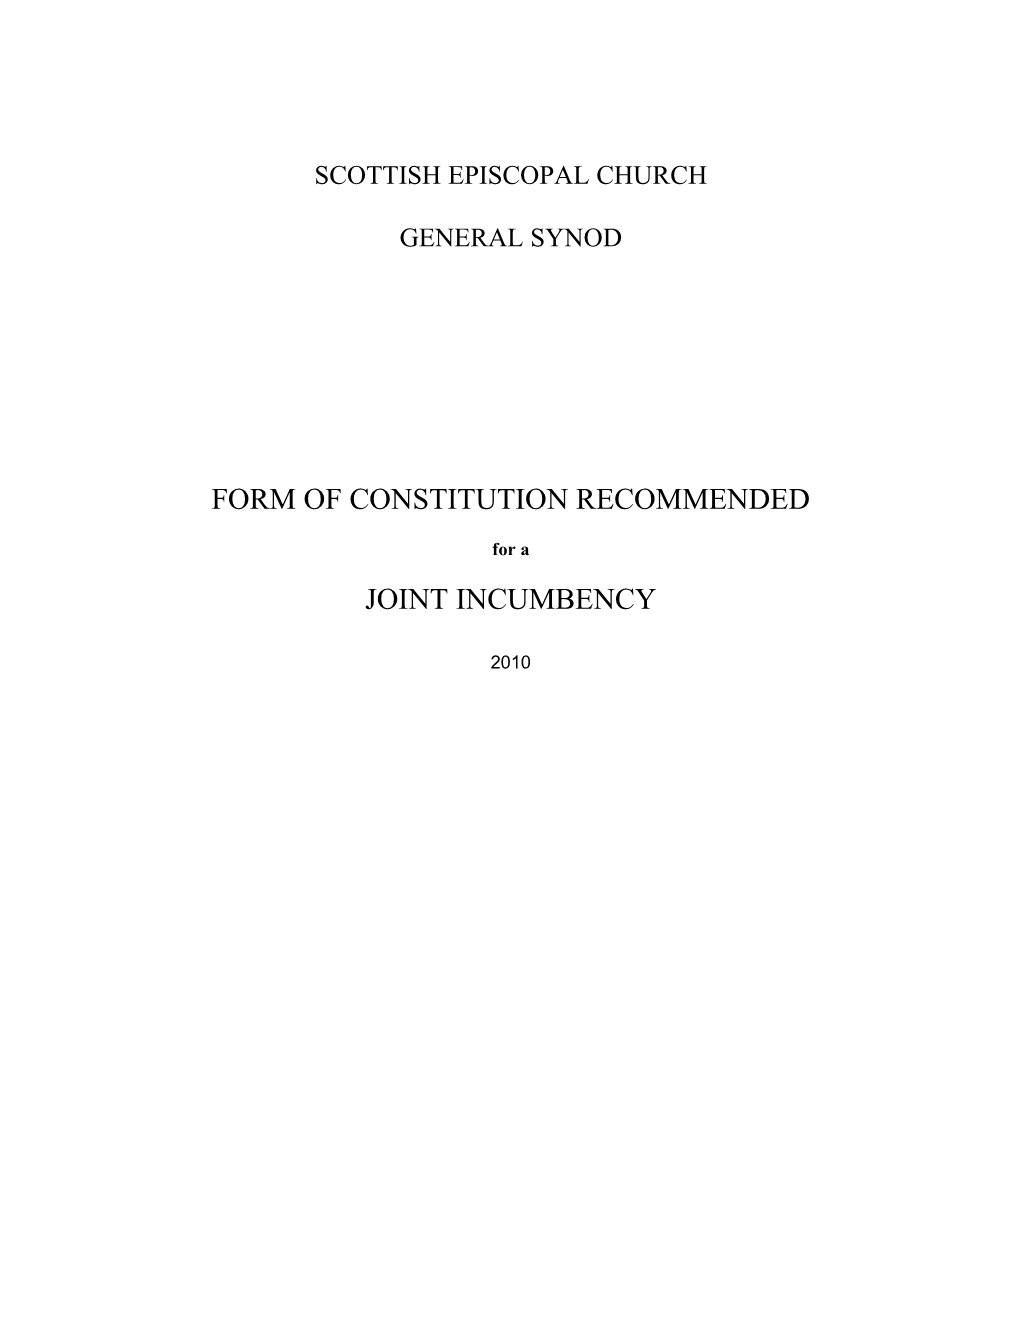 Form of Constitutionrecommended